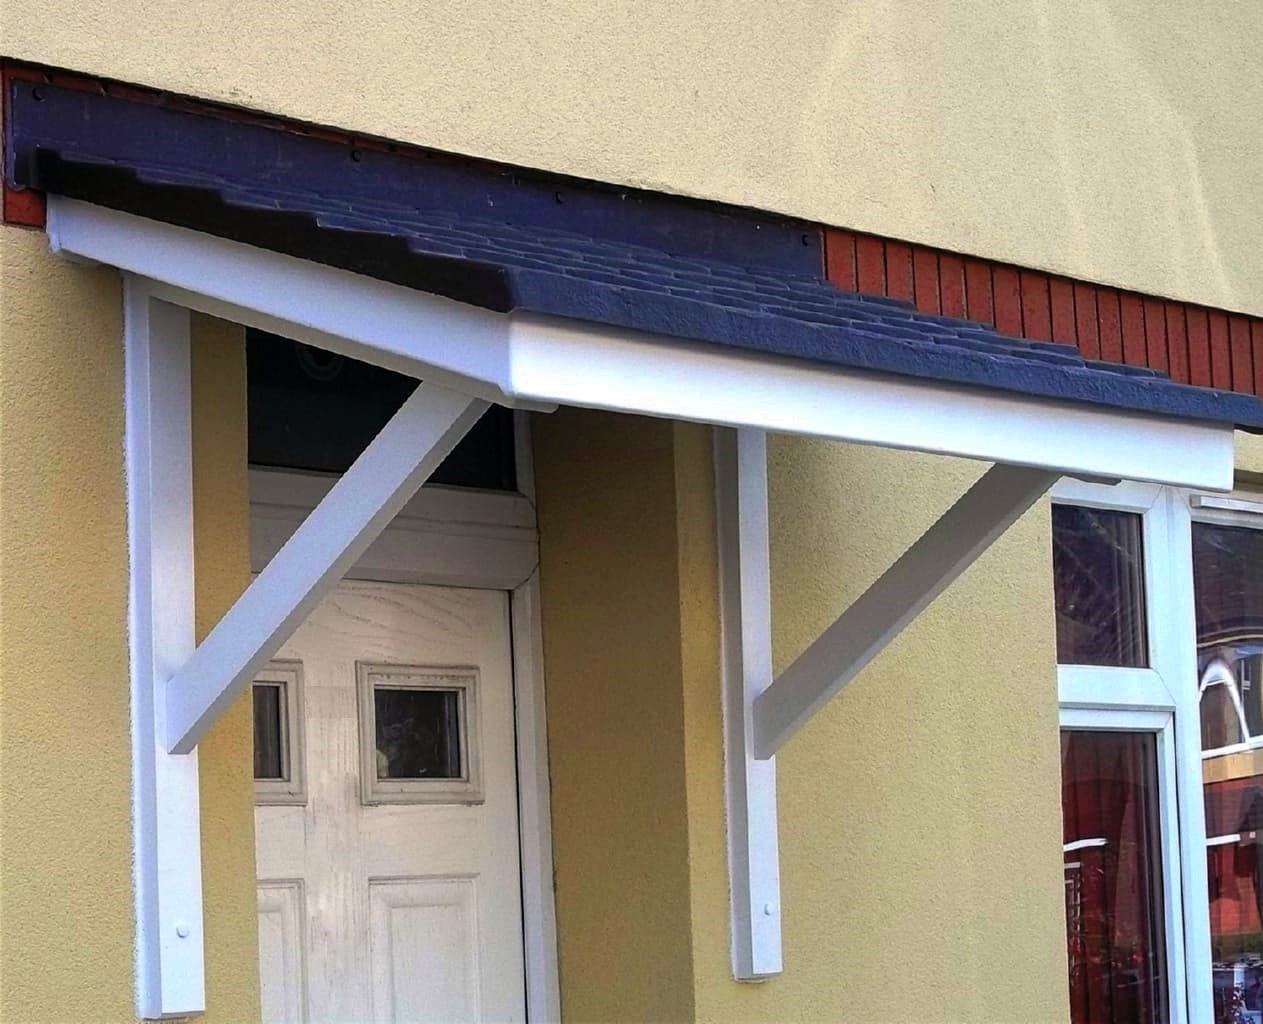 How to make an awning for a door